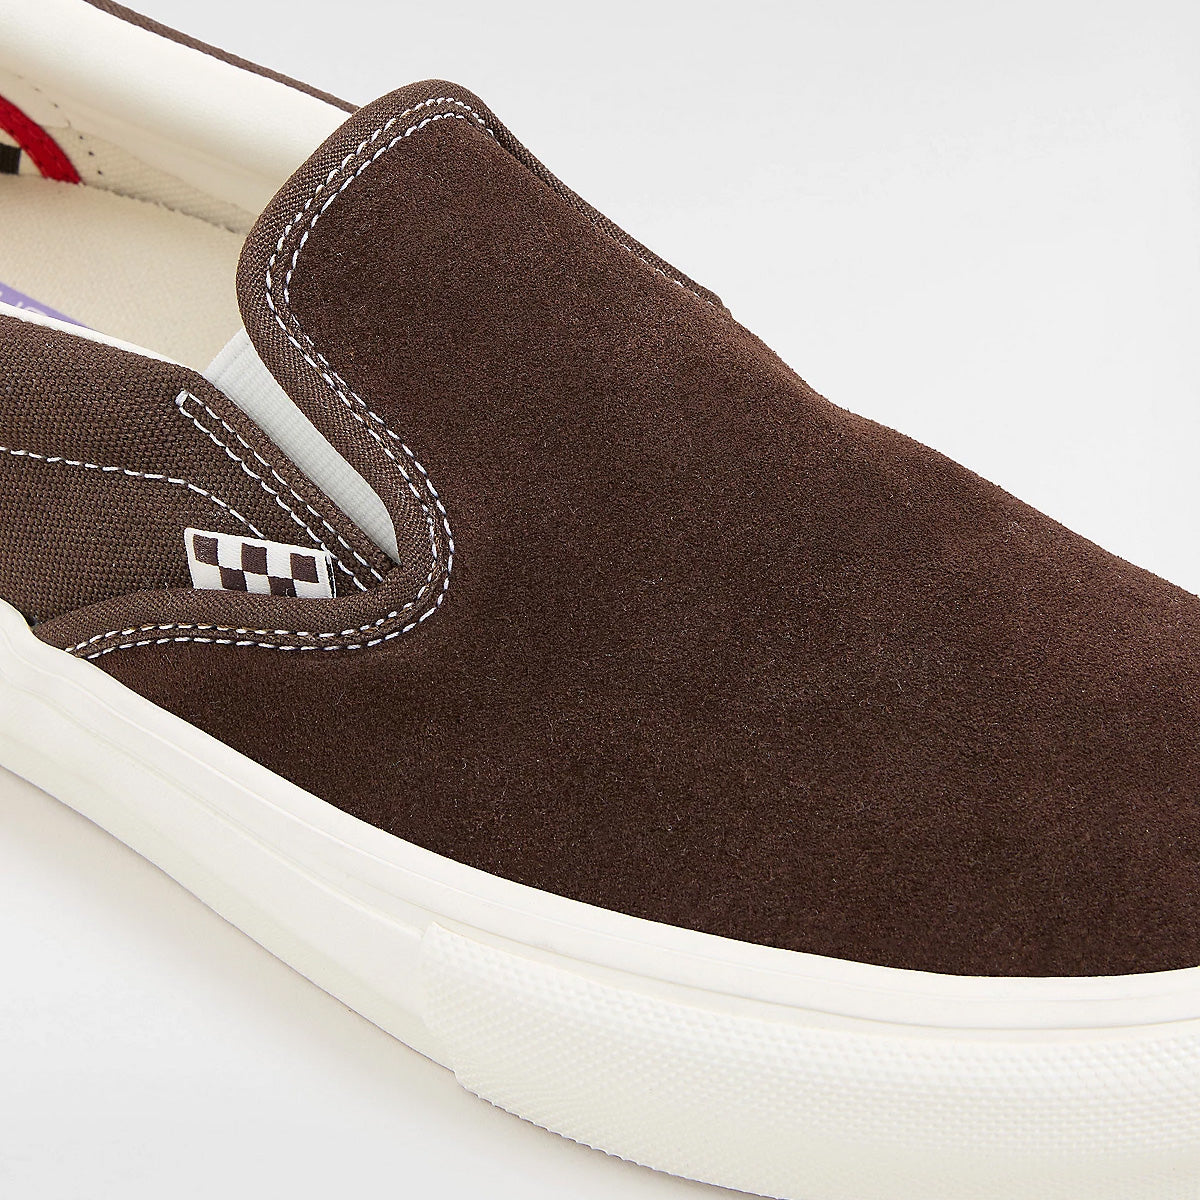 Brown vans slip on skate shoes with white soles and checkered tab. Free uk  shipping over £50